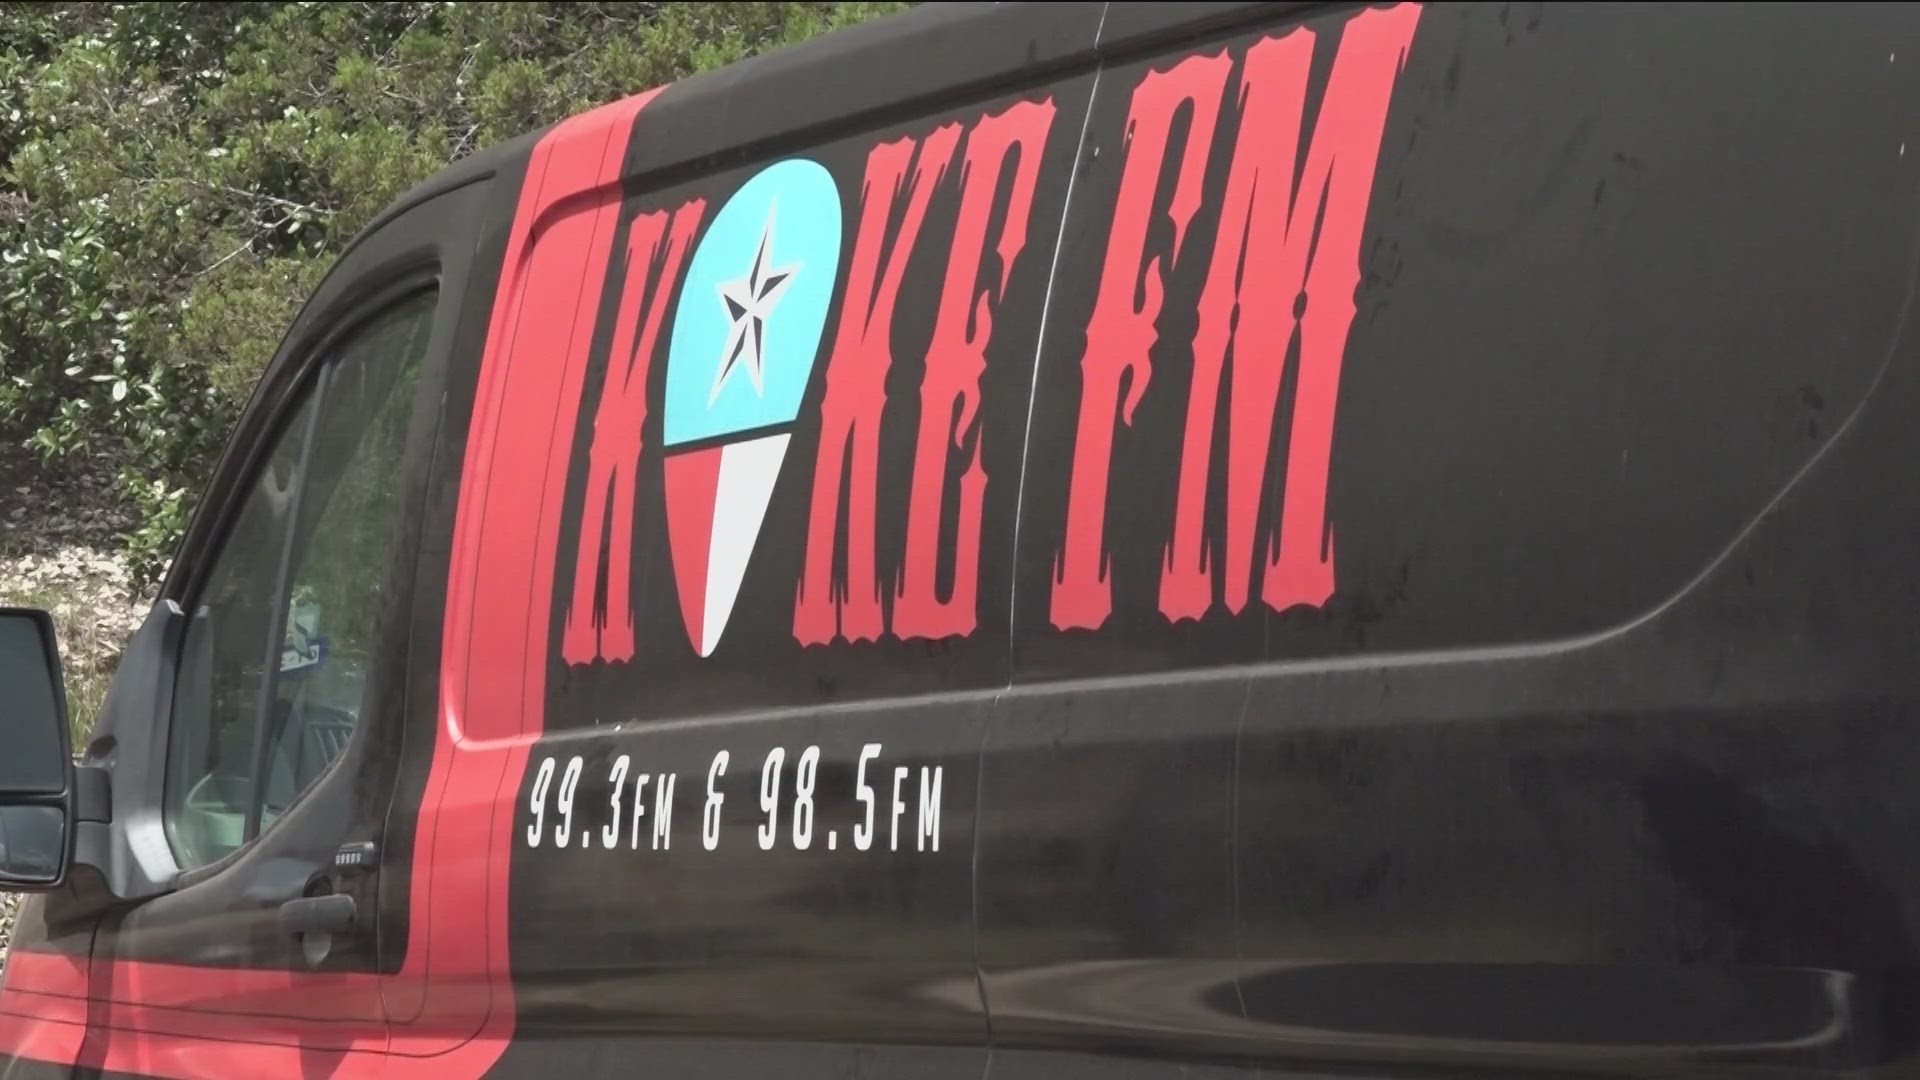 Norsan Media reports that it's buying Genuine Austin Radio, which runs the two stations.